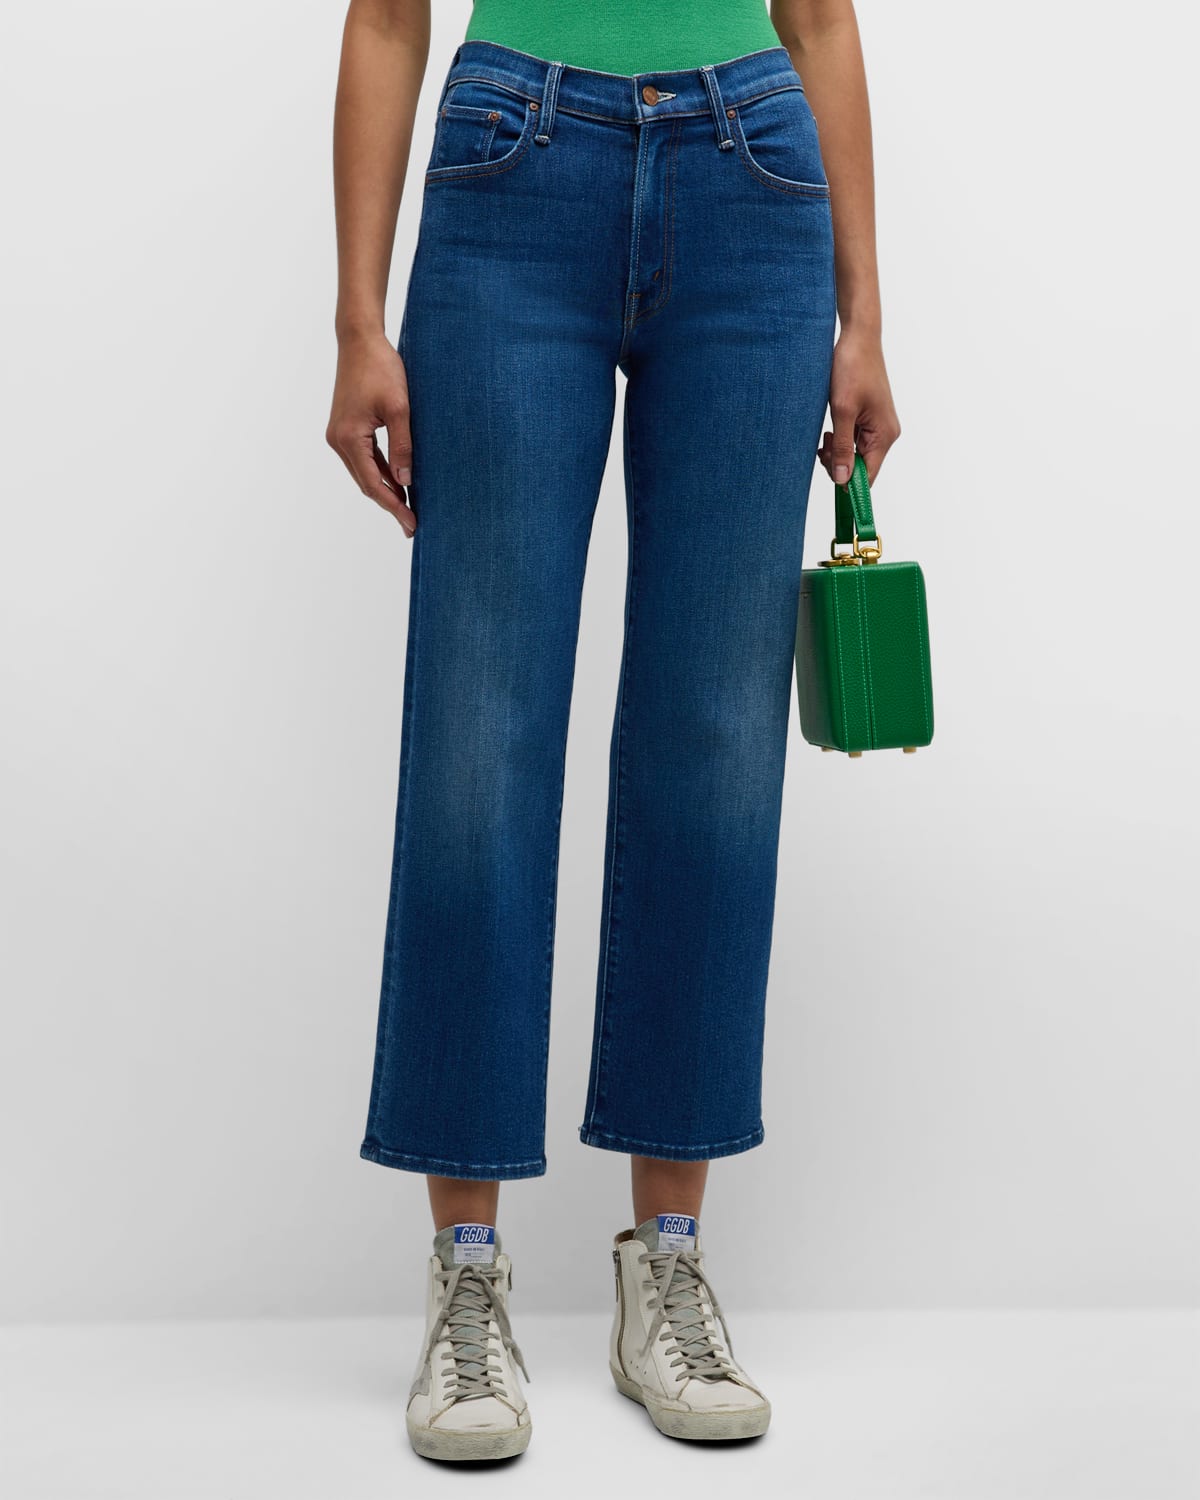 The Mid Rise Rambler Zip Ankle Jeans